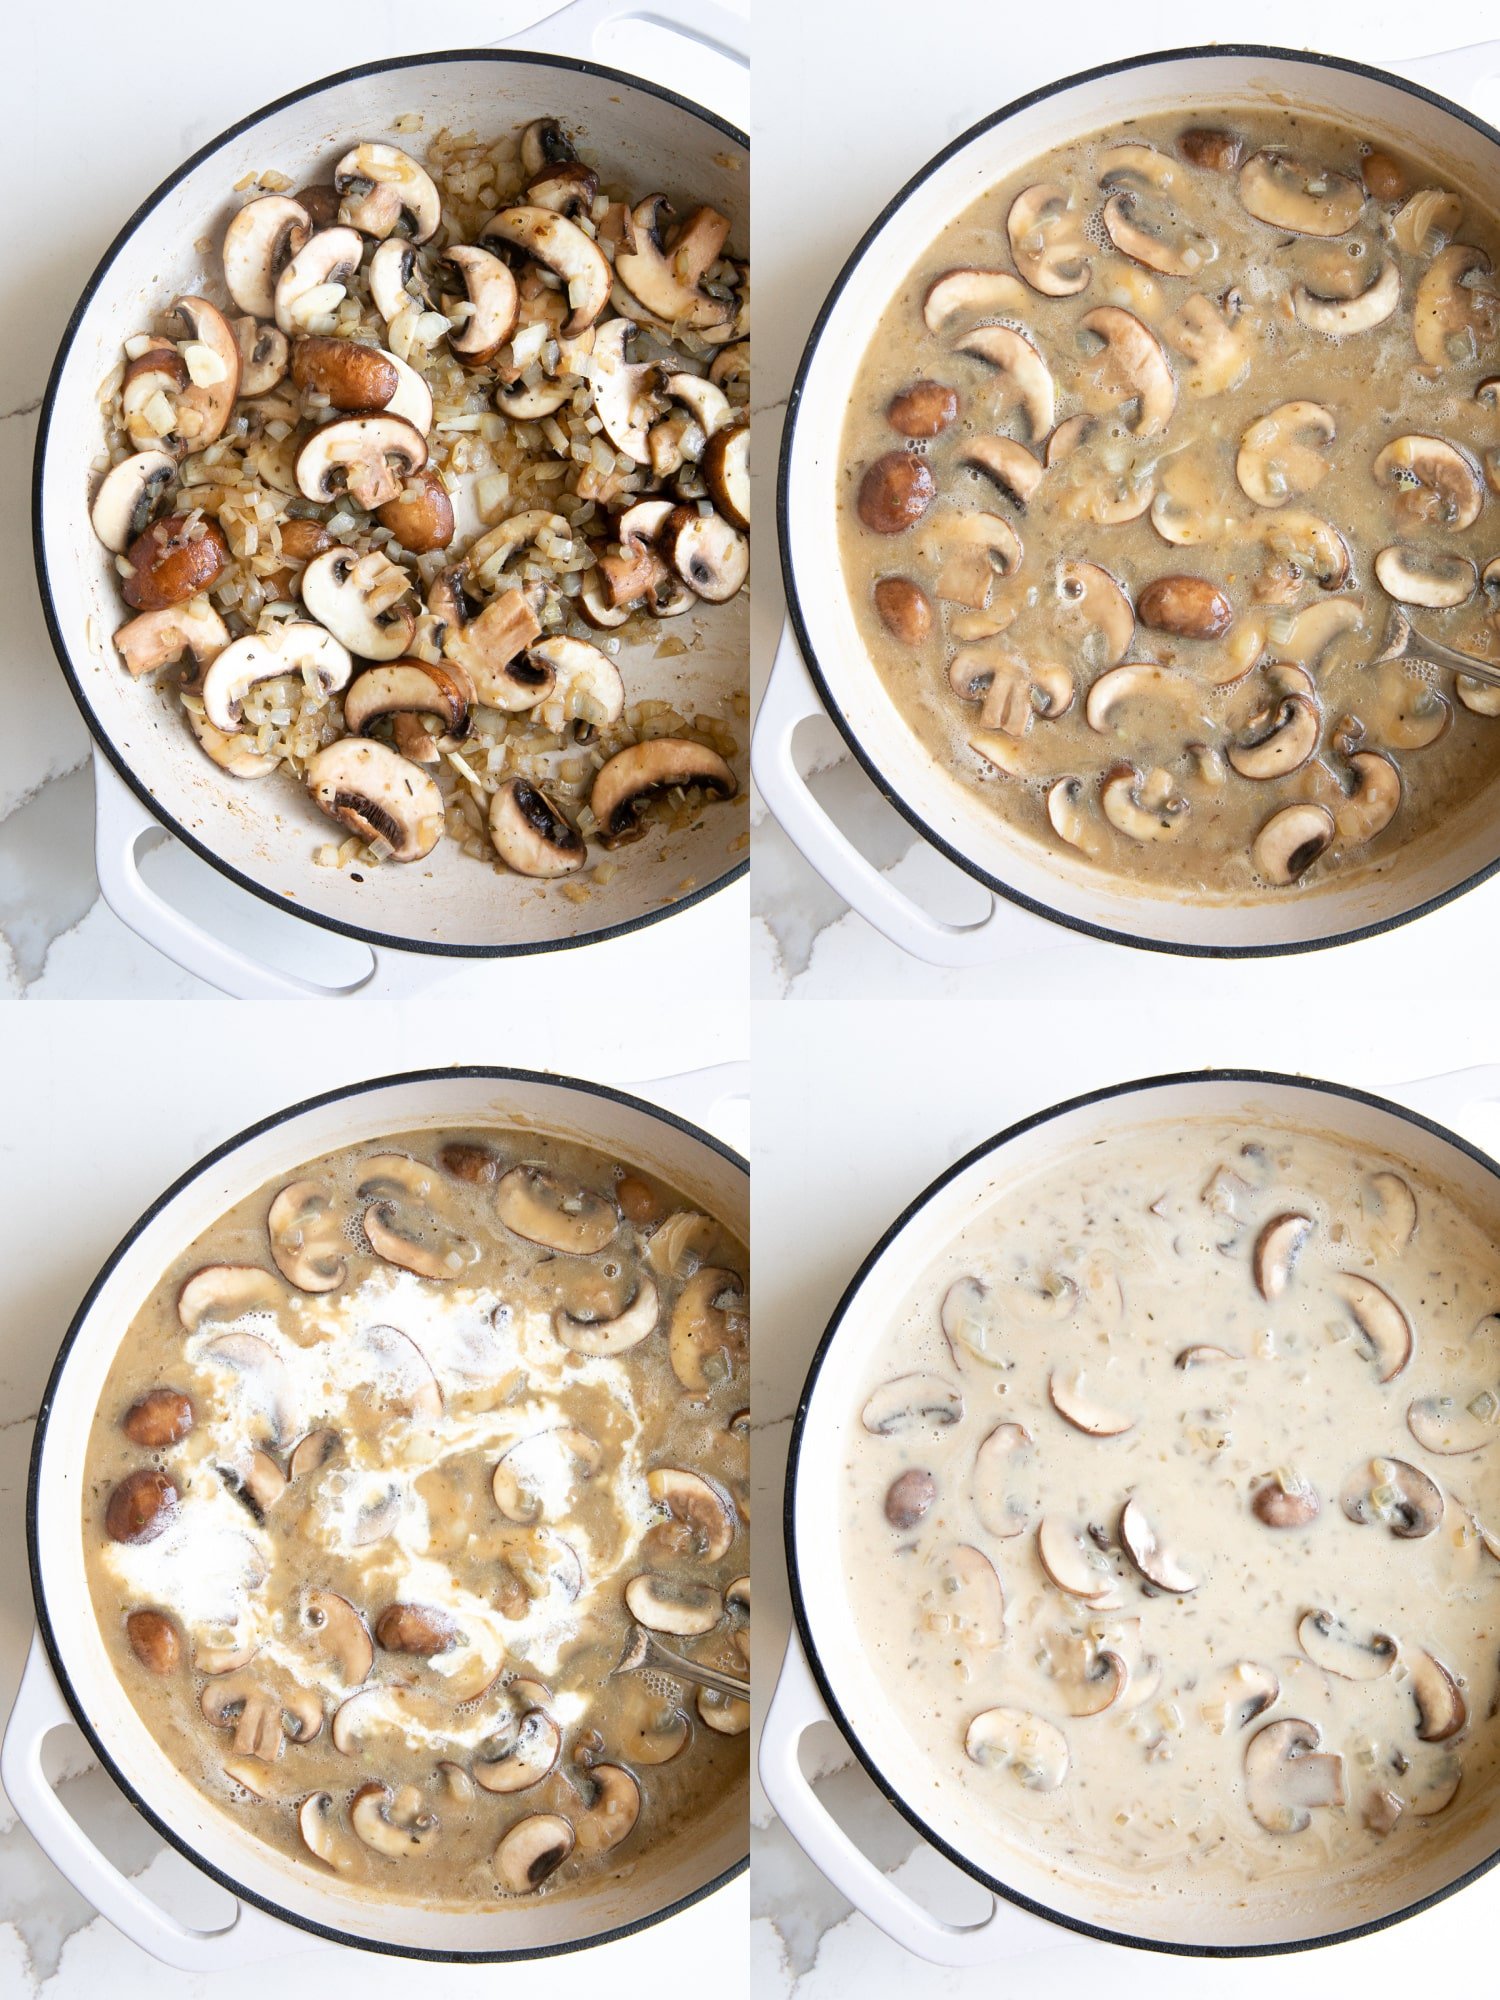 Collaged of 4 images showing the step to prepare the creamy mushroom sauce for smothered pork chops.